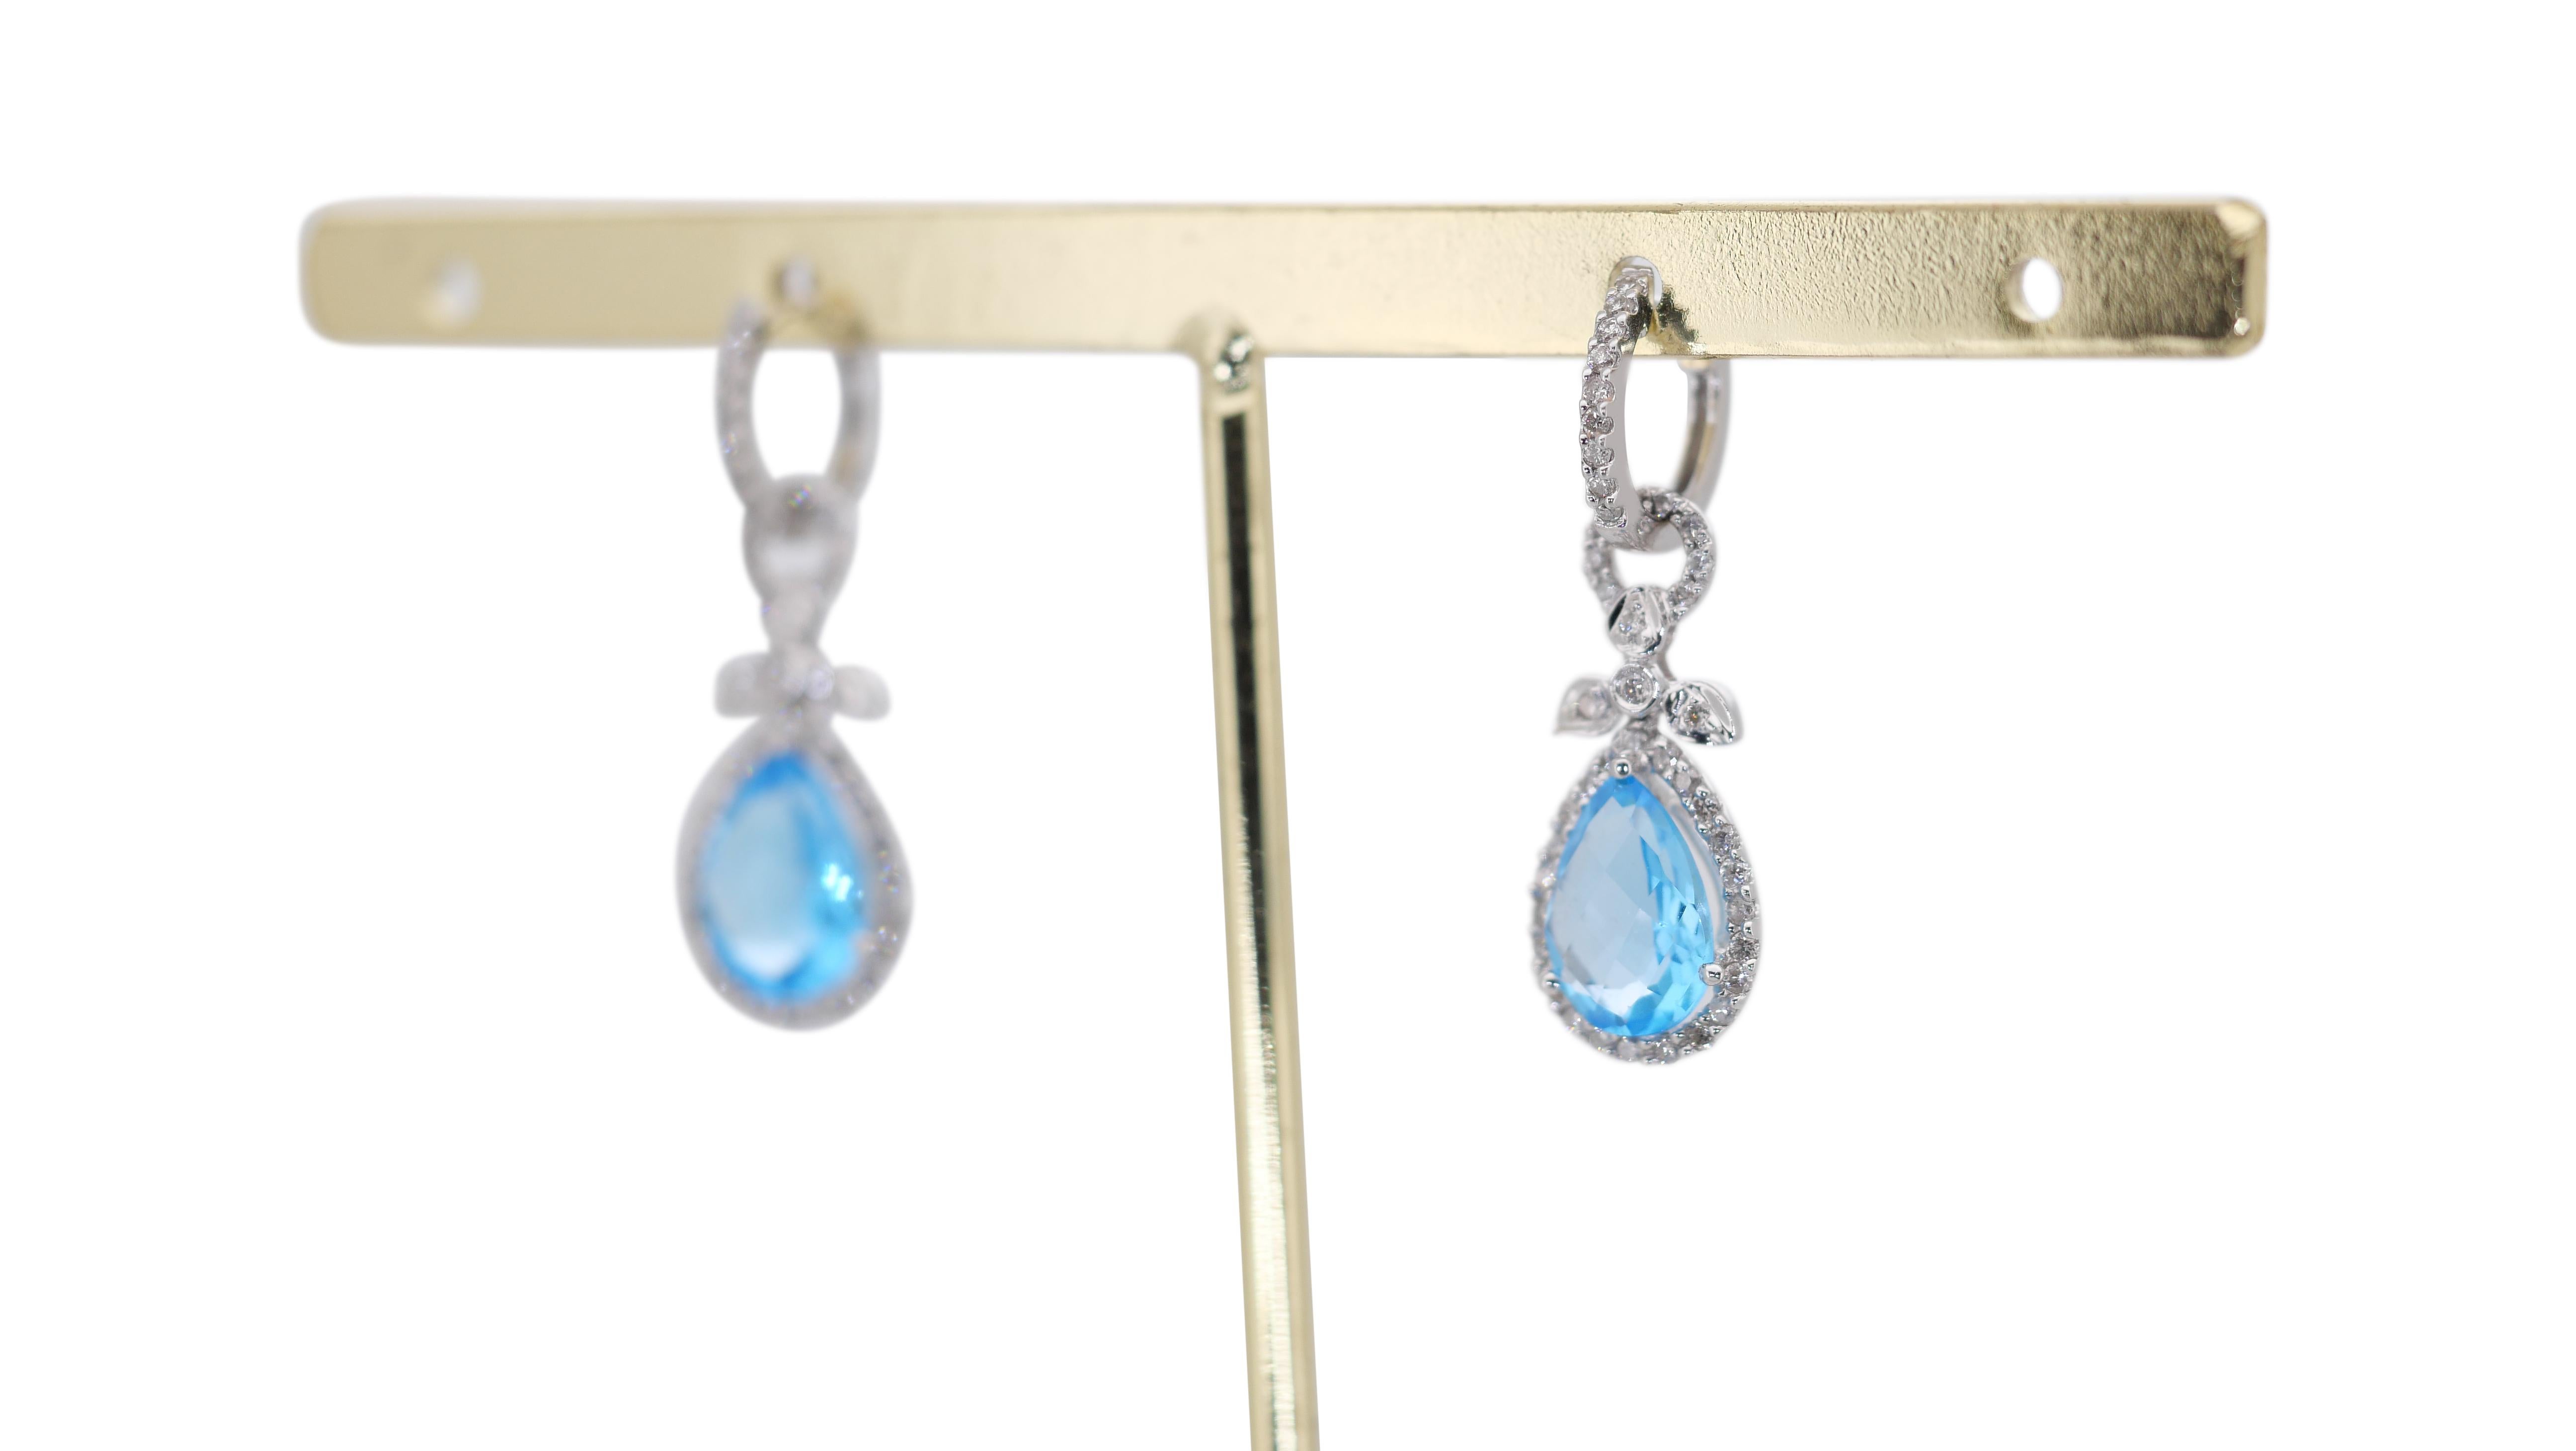 Women's Luxurious 18k White Gold Dangle Earrings with 5 Carat Natural Topaz and Diamonds